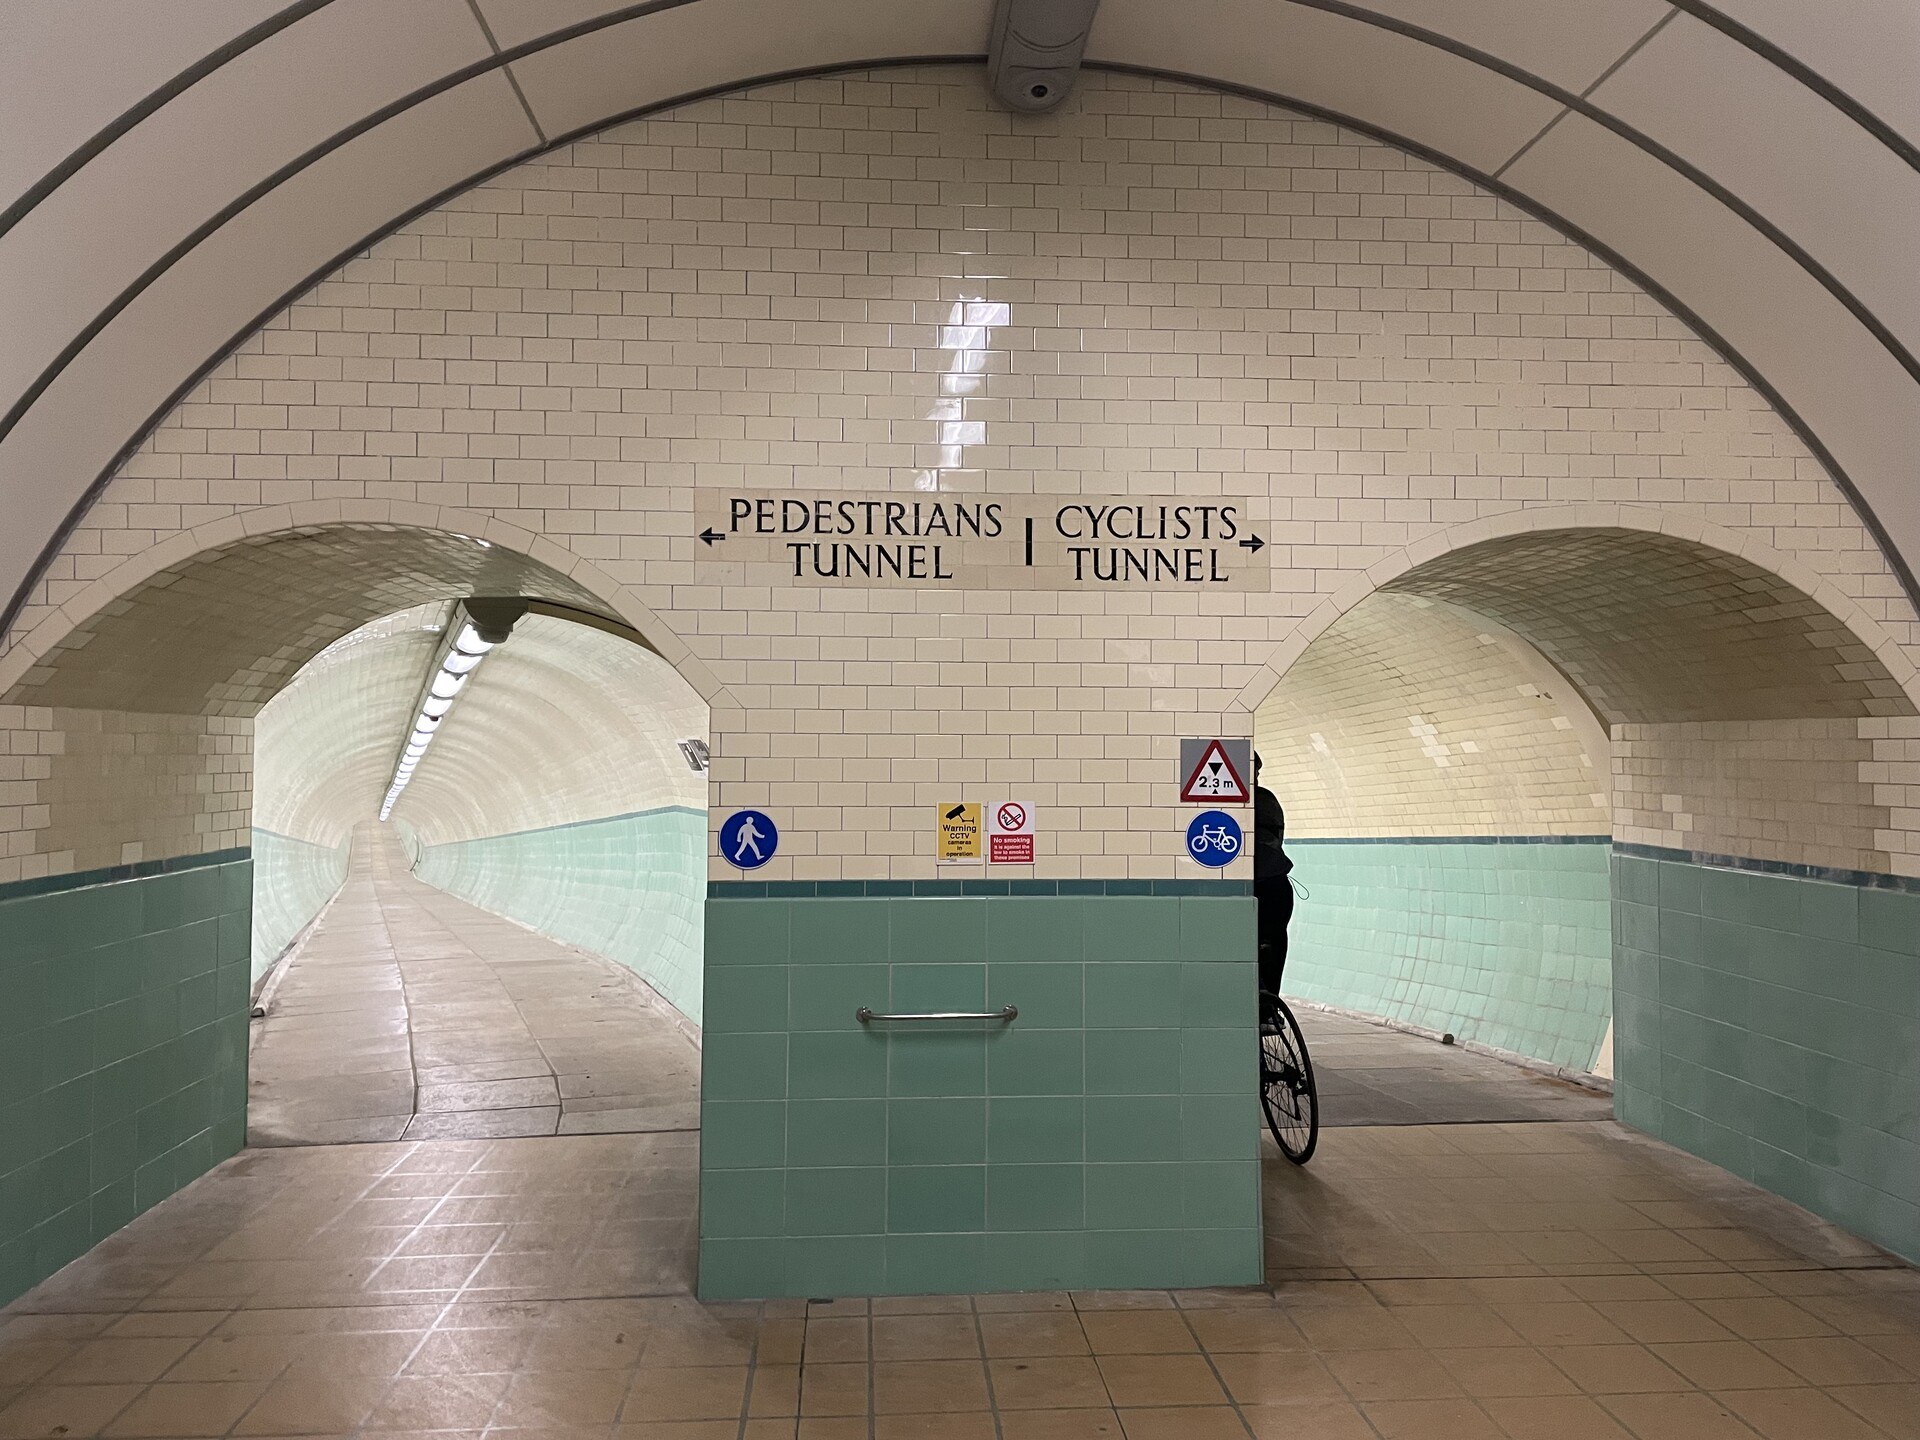 One pedestrian tunnel, one cycle tunnel under the Tyne